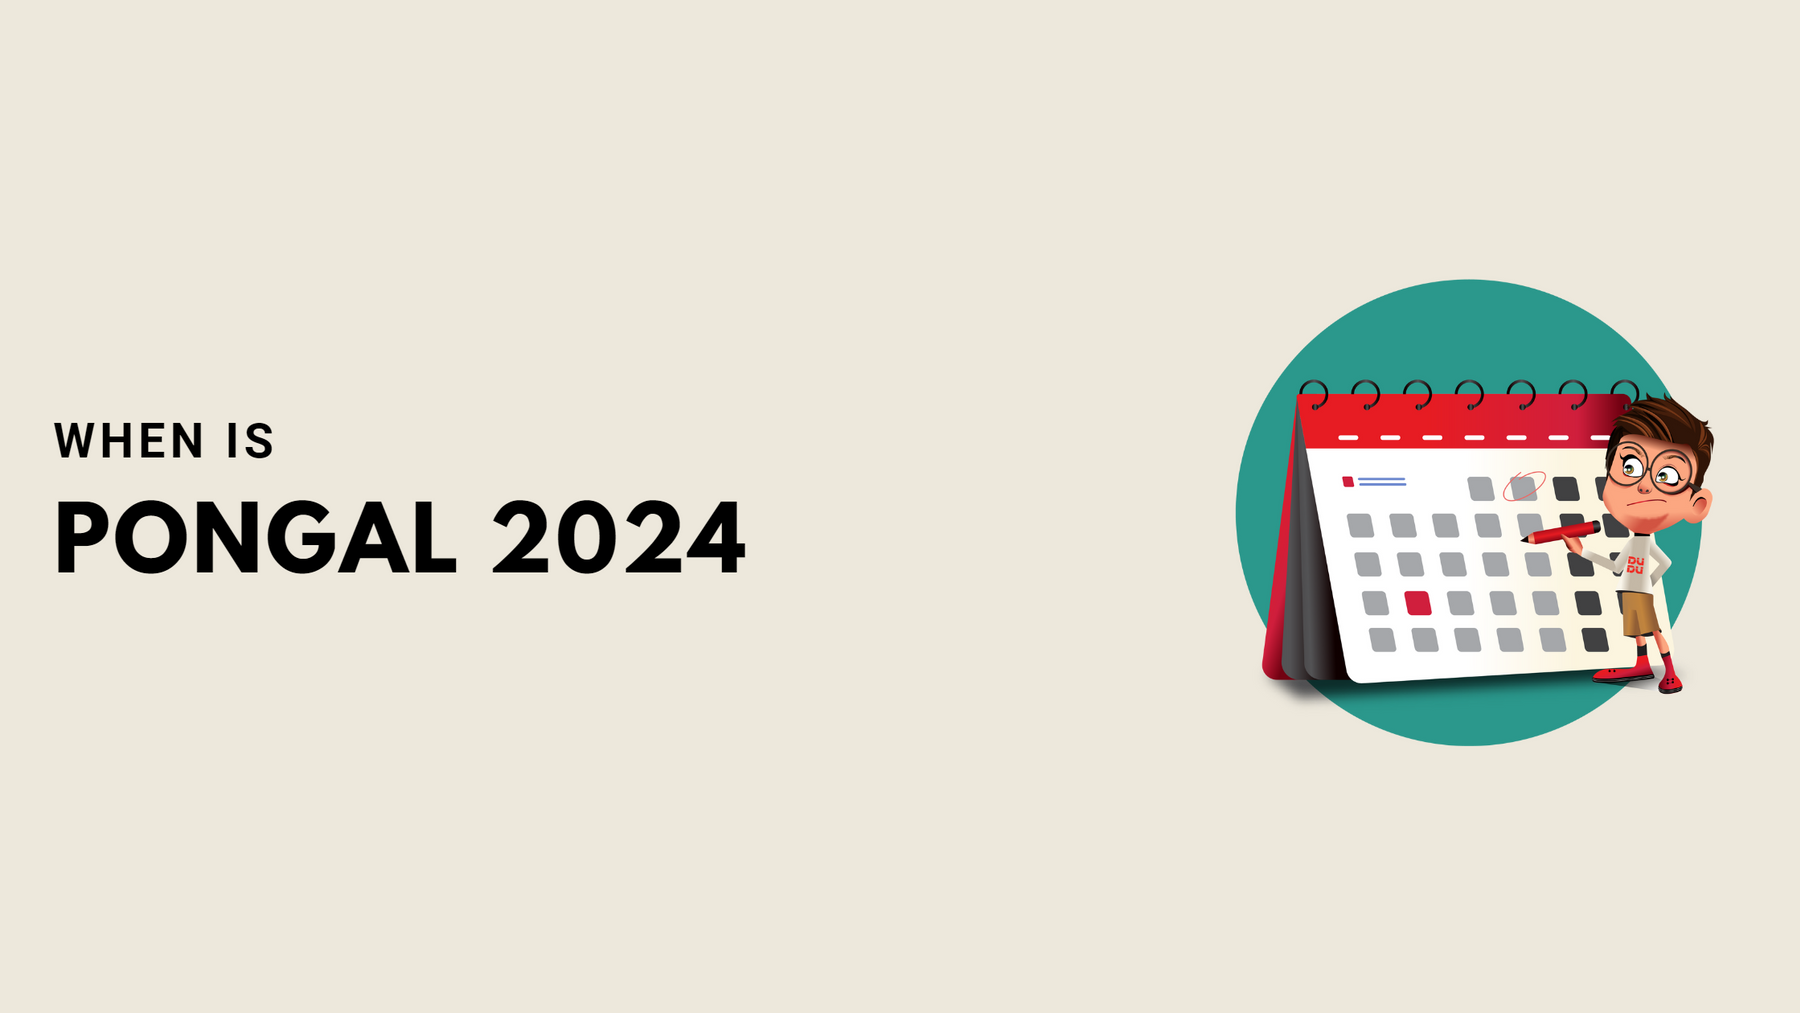 When Is Pongal 2024?